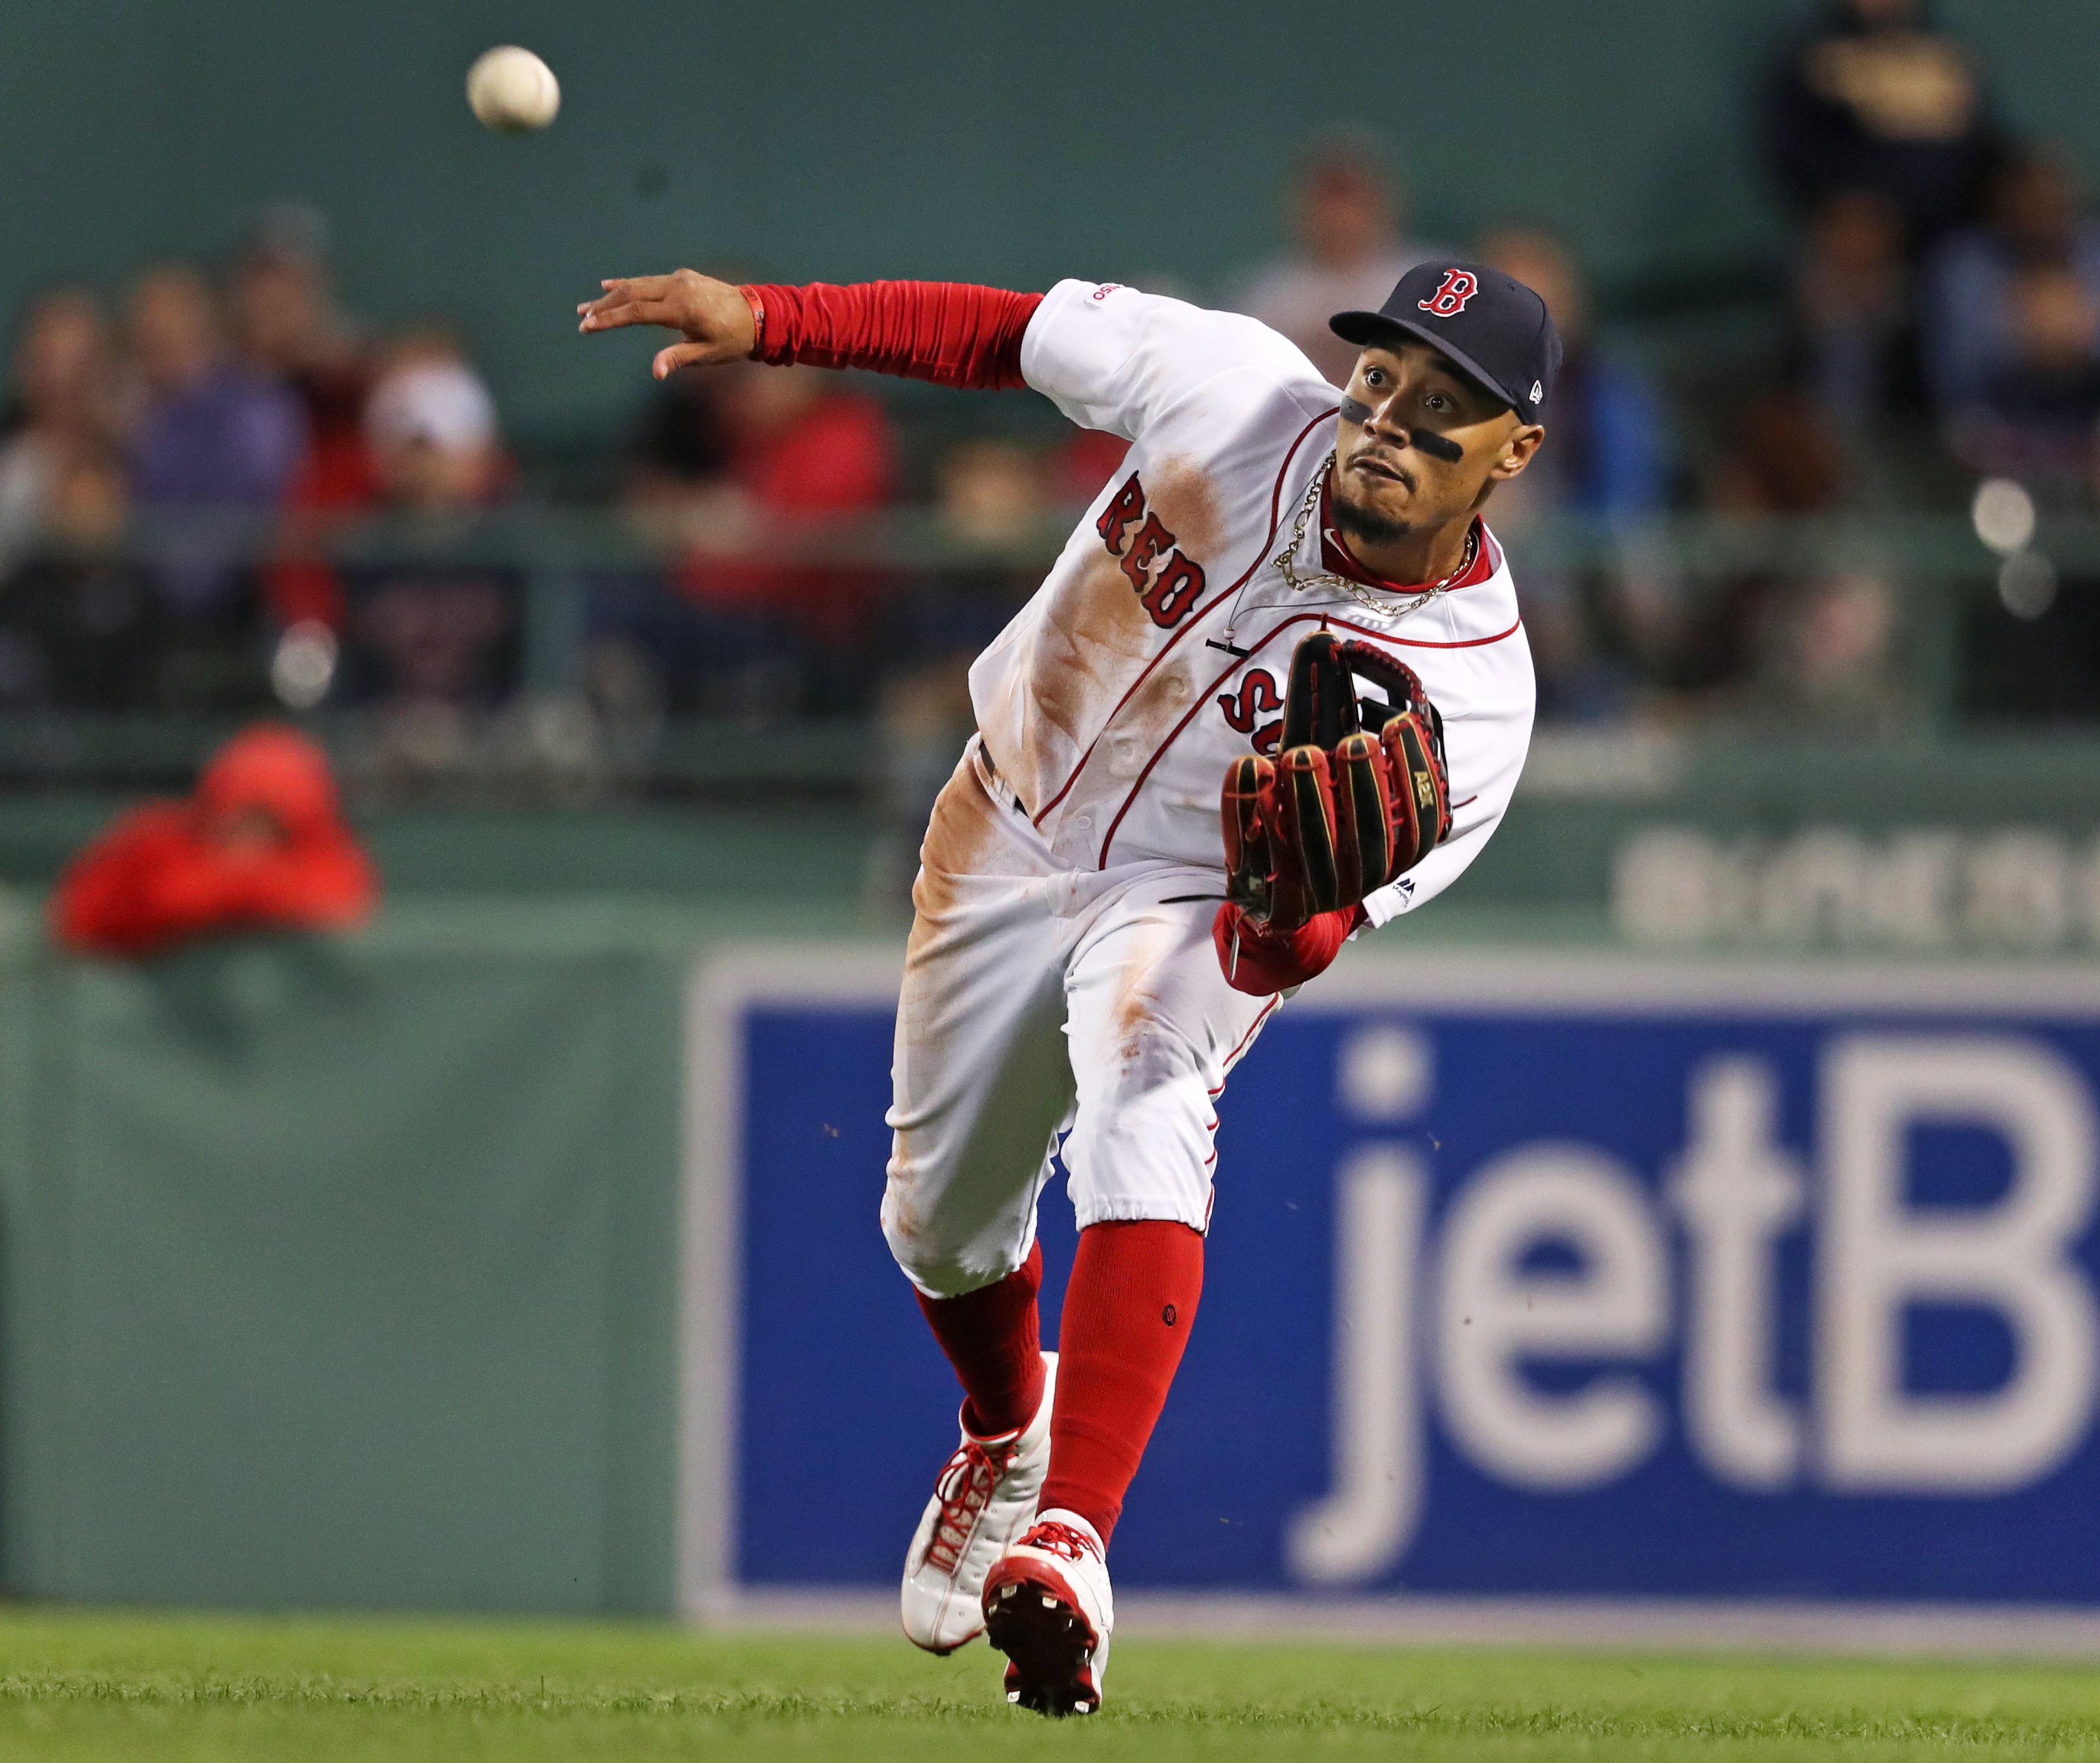 Red Sox outfielder Mookie Betts has a good idea when it comes to